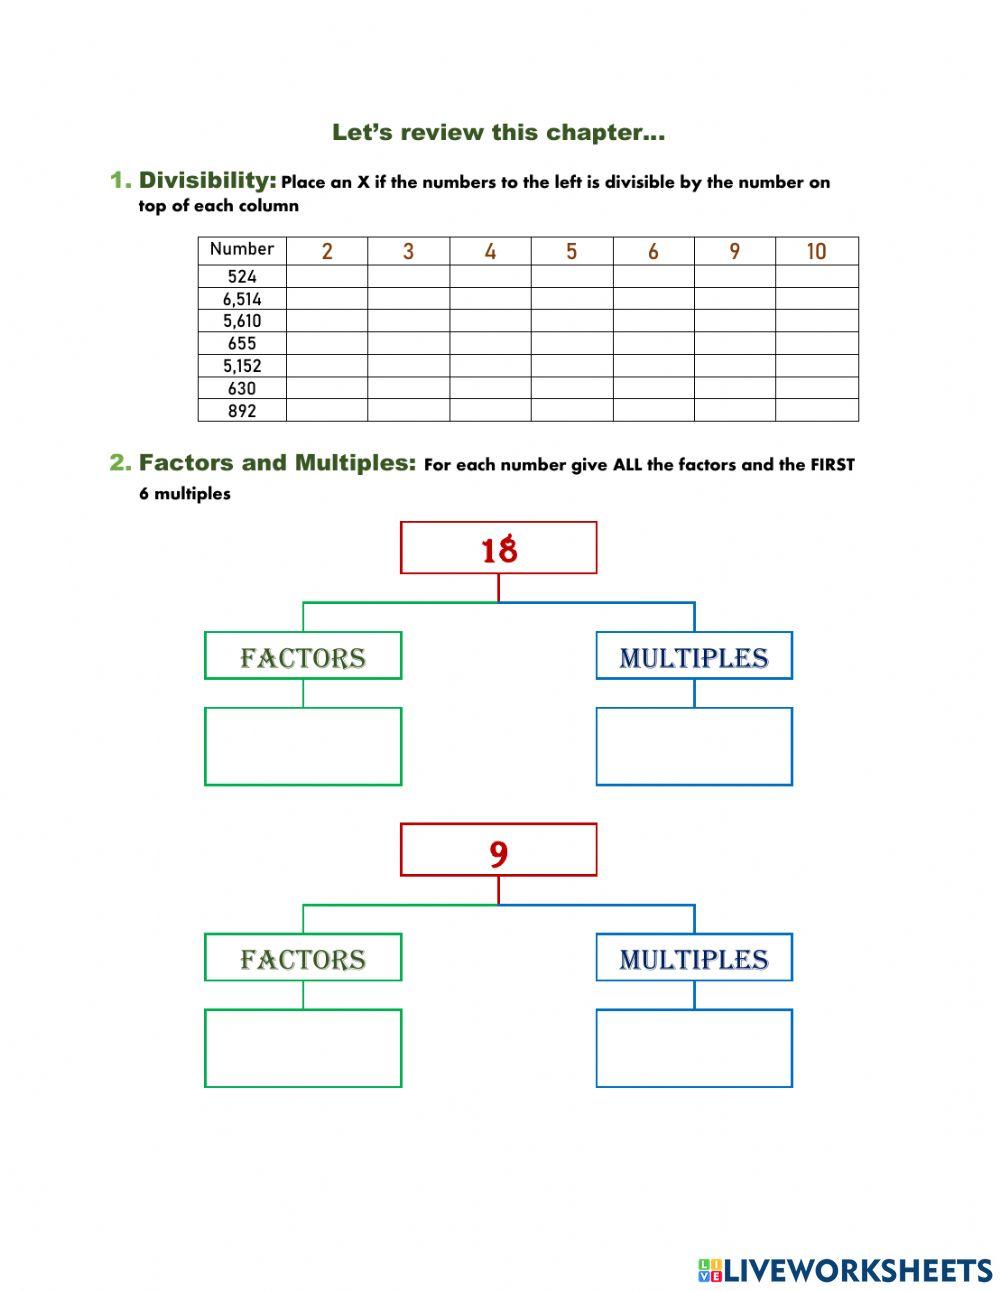 Divisibility, Factors, Multiples and Prime numbers